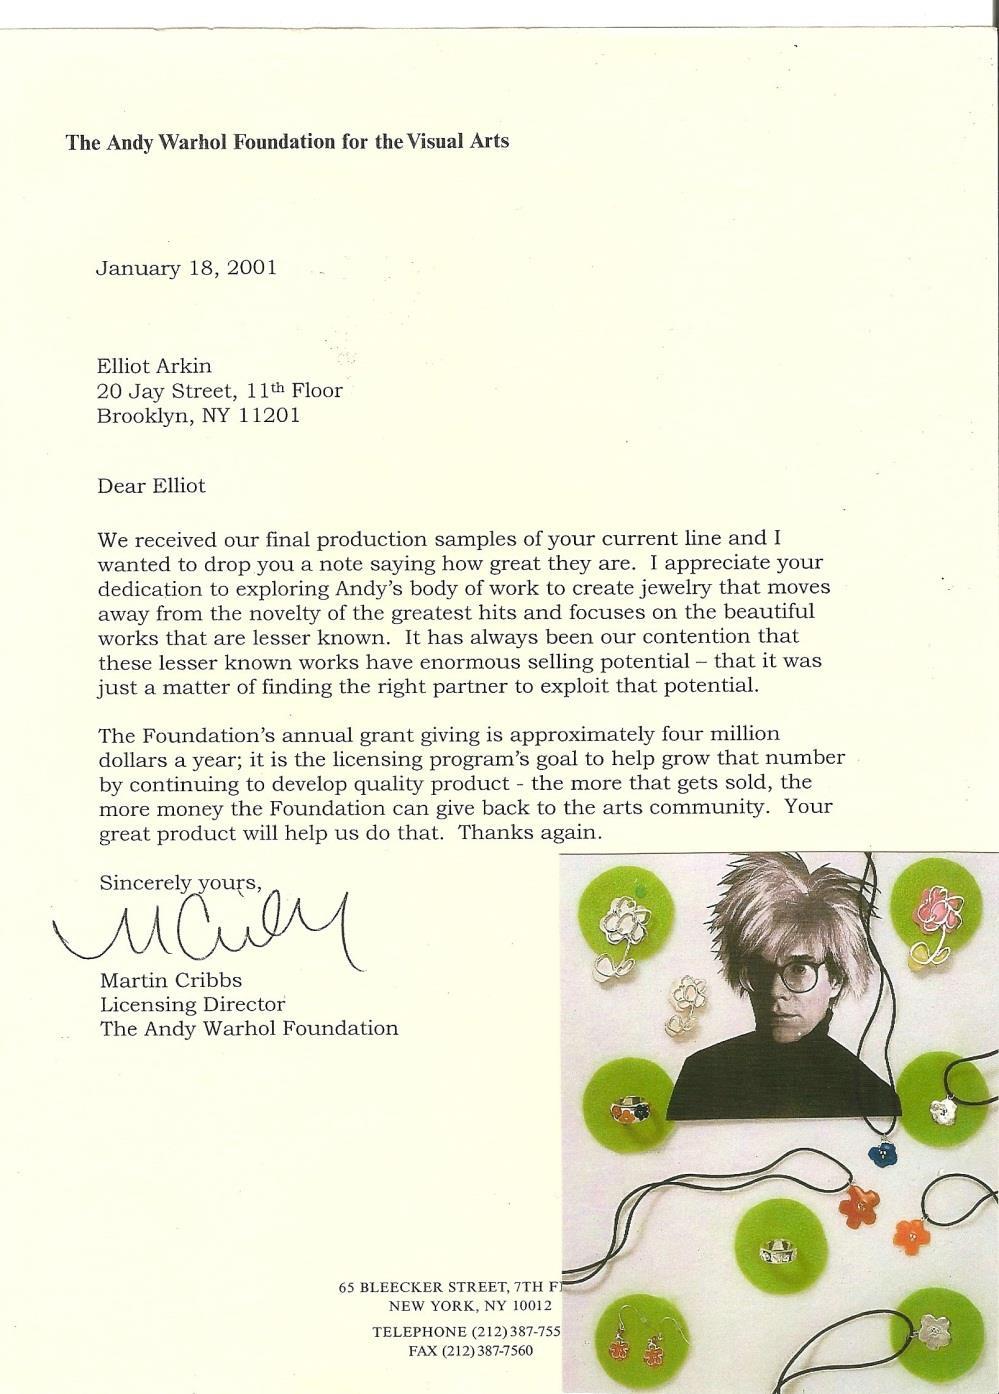 2000 - Andy Warhol Jewelry Collection: Commissioned by the Andy Warhol Foundation to